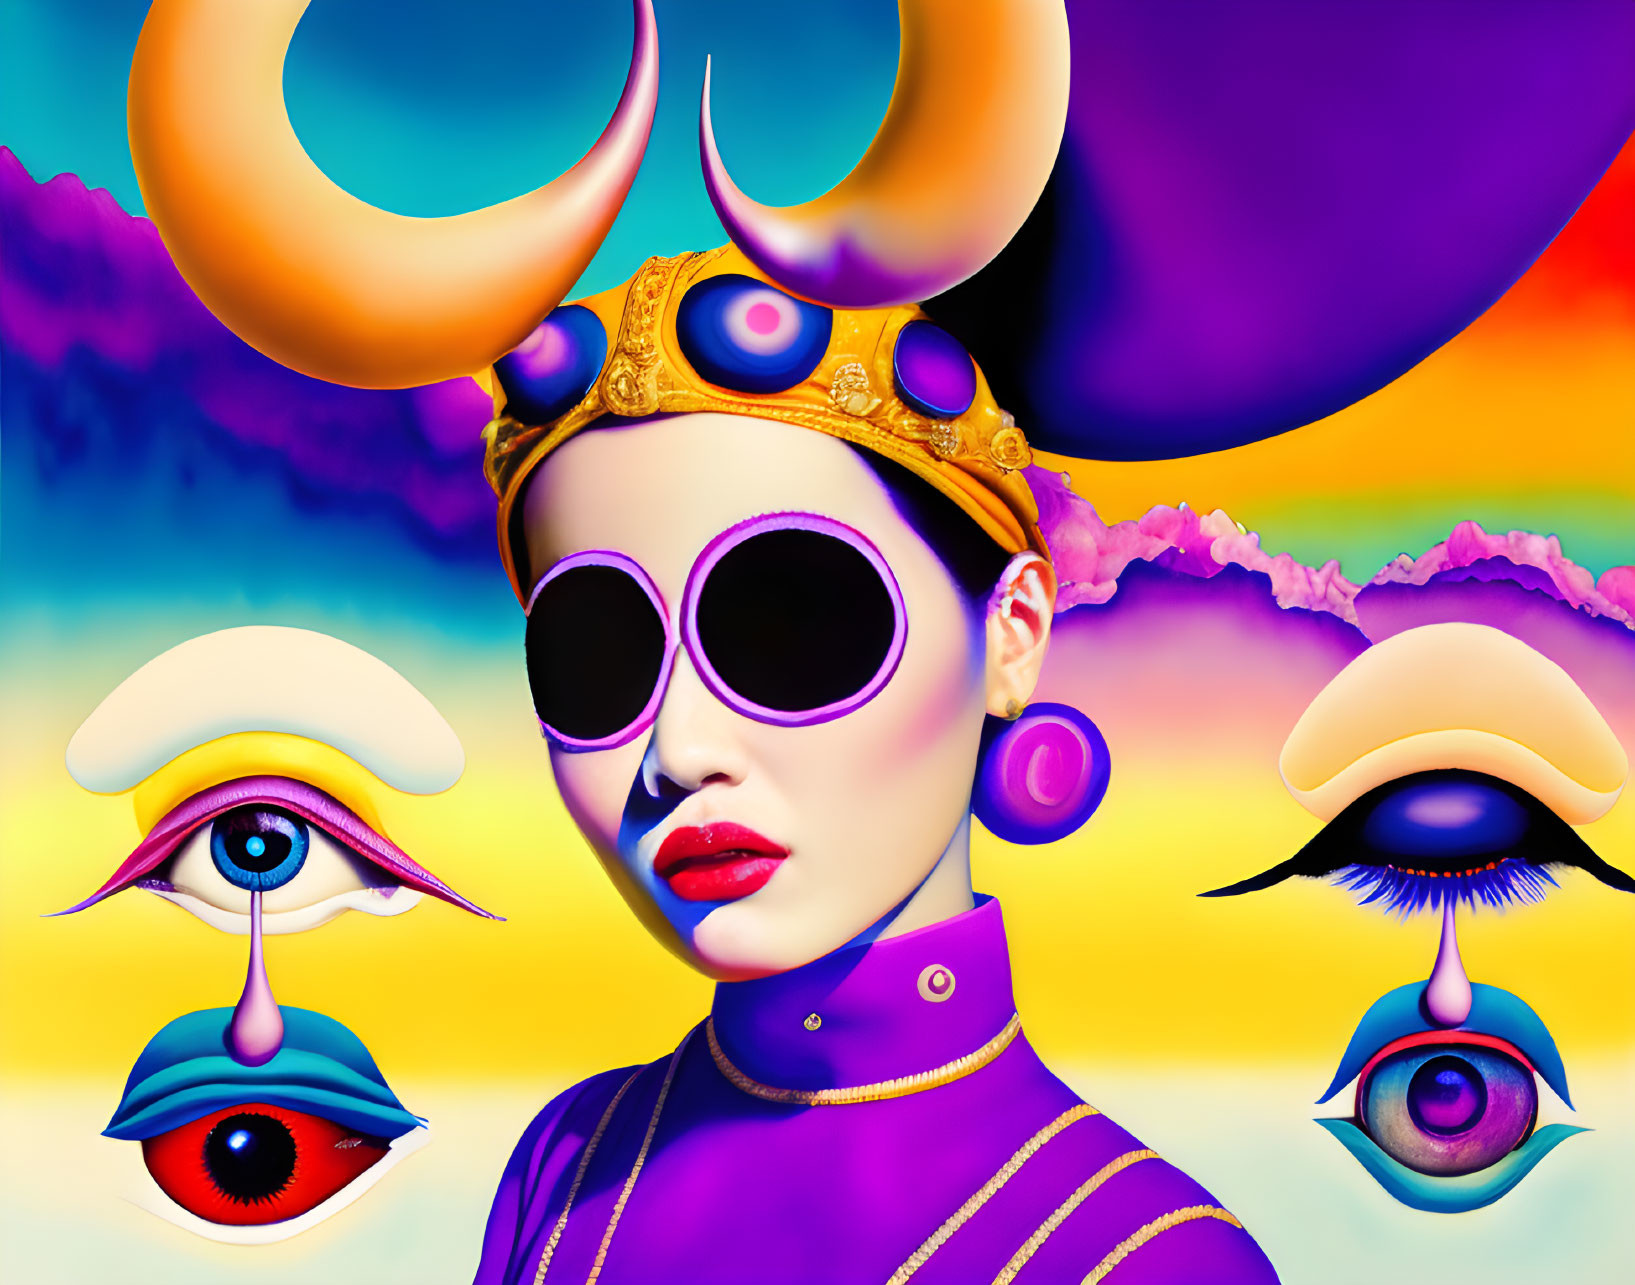 Surreal digital artwork: Woman with purple skin, round sunglasses, and horned headdress on